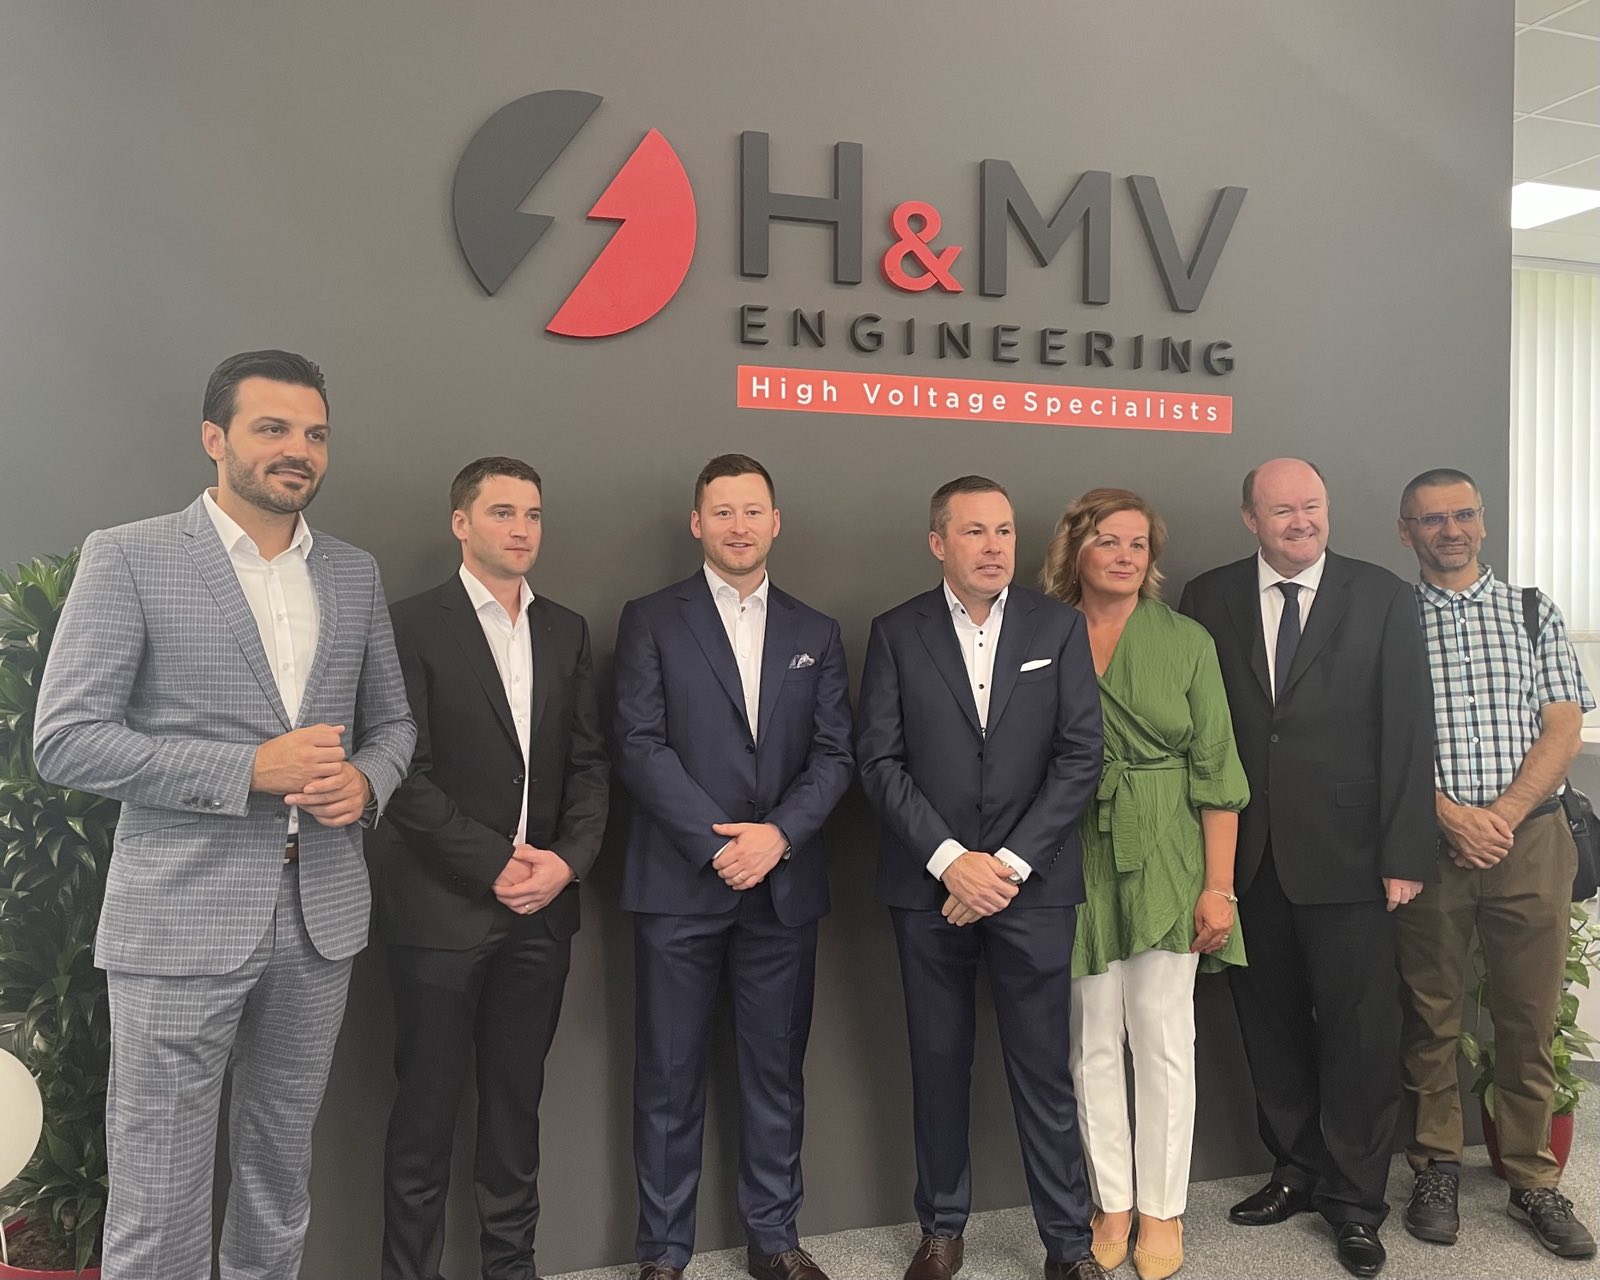 From Ireland to Croatia: H&MV Engineering opens office and high-skilled job opportunities 